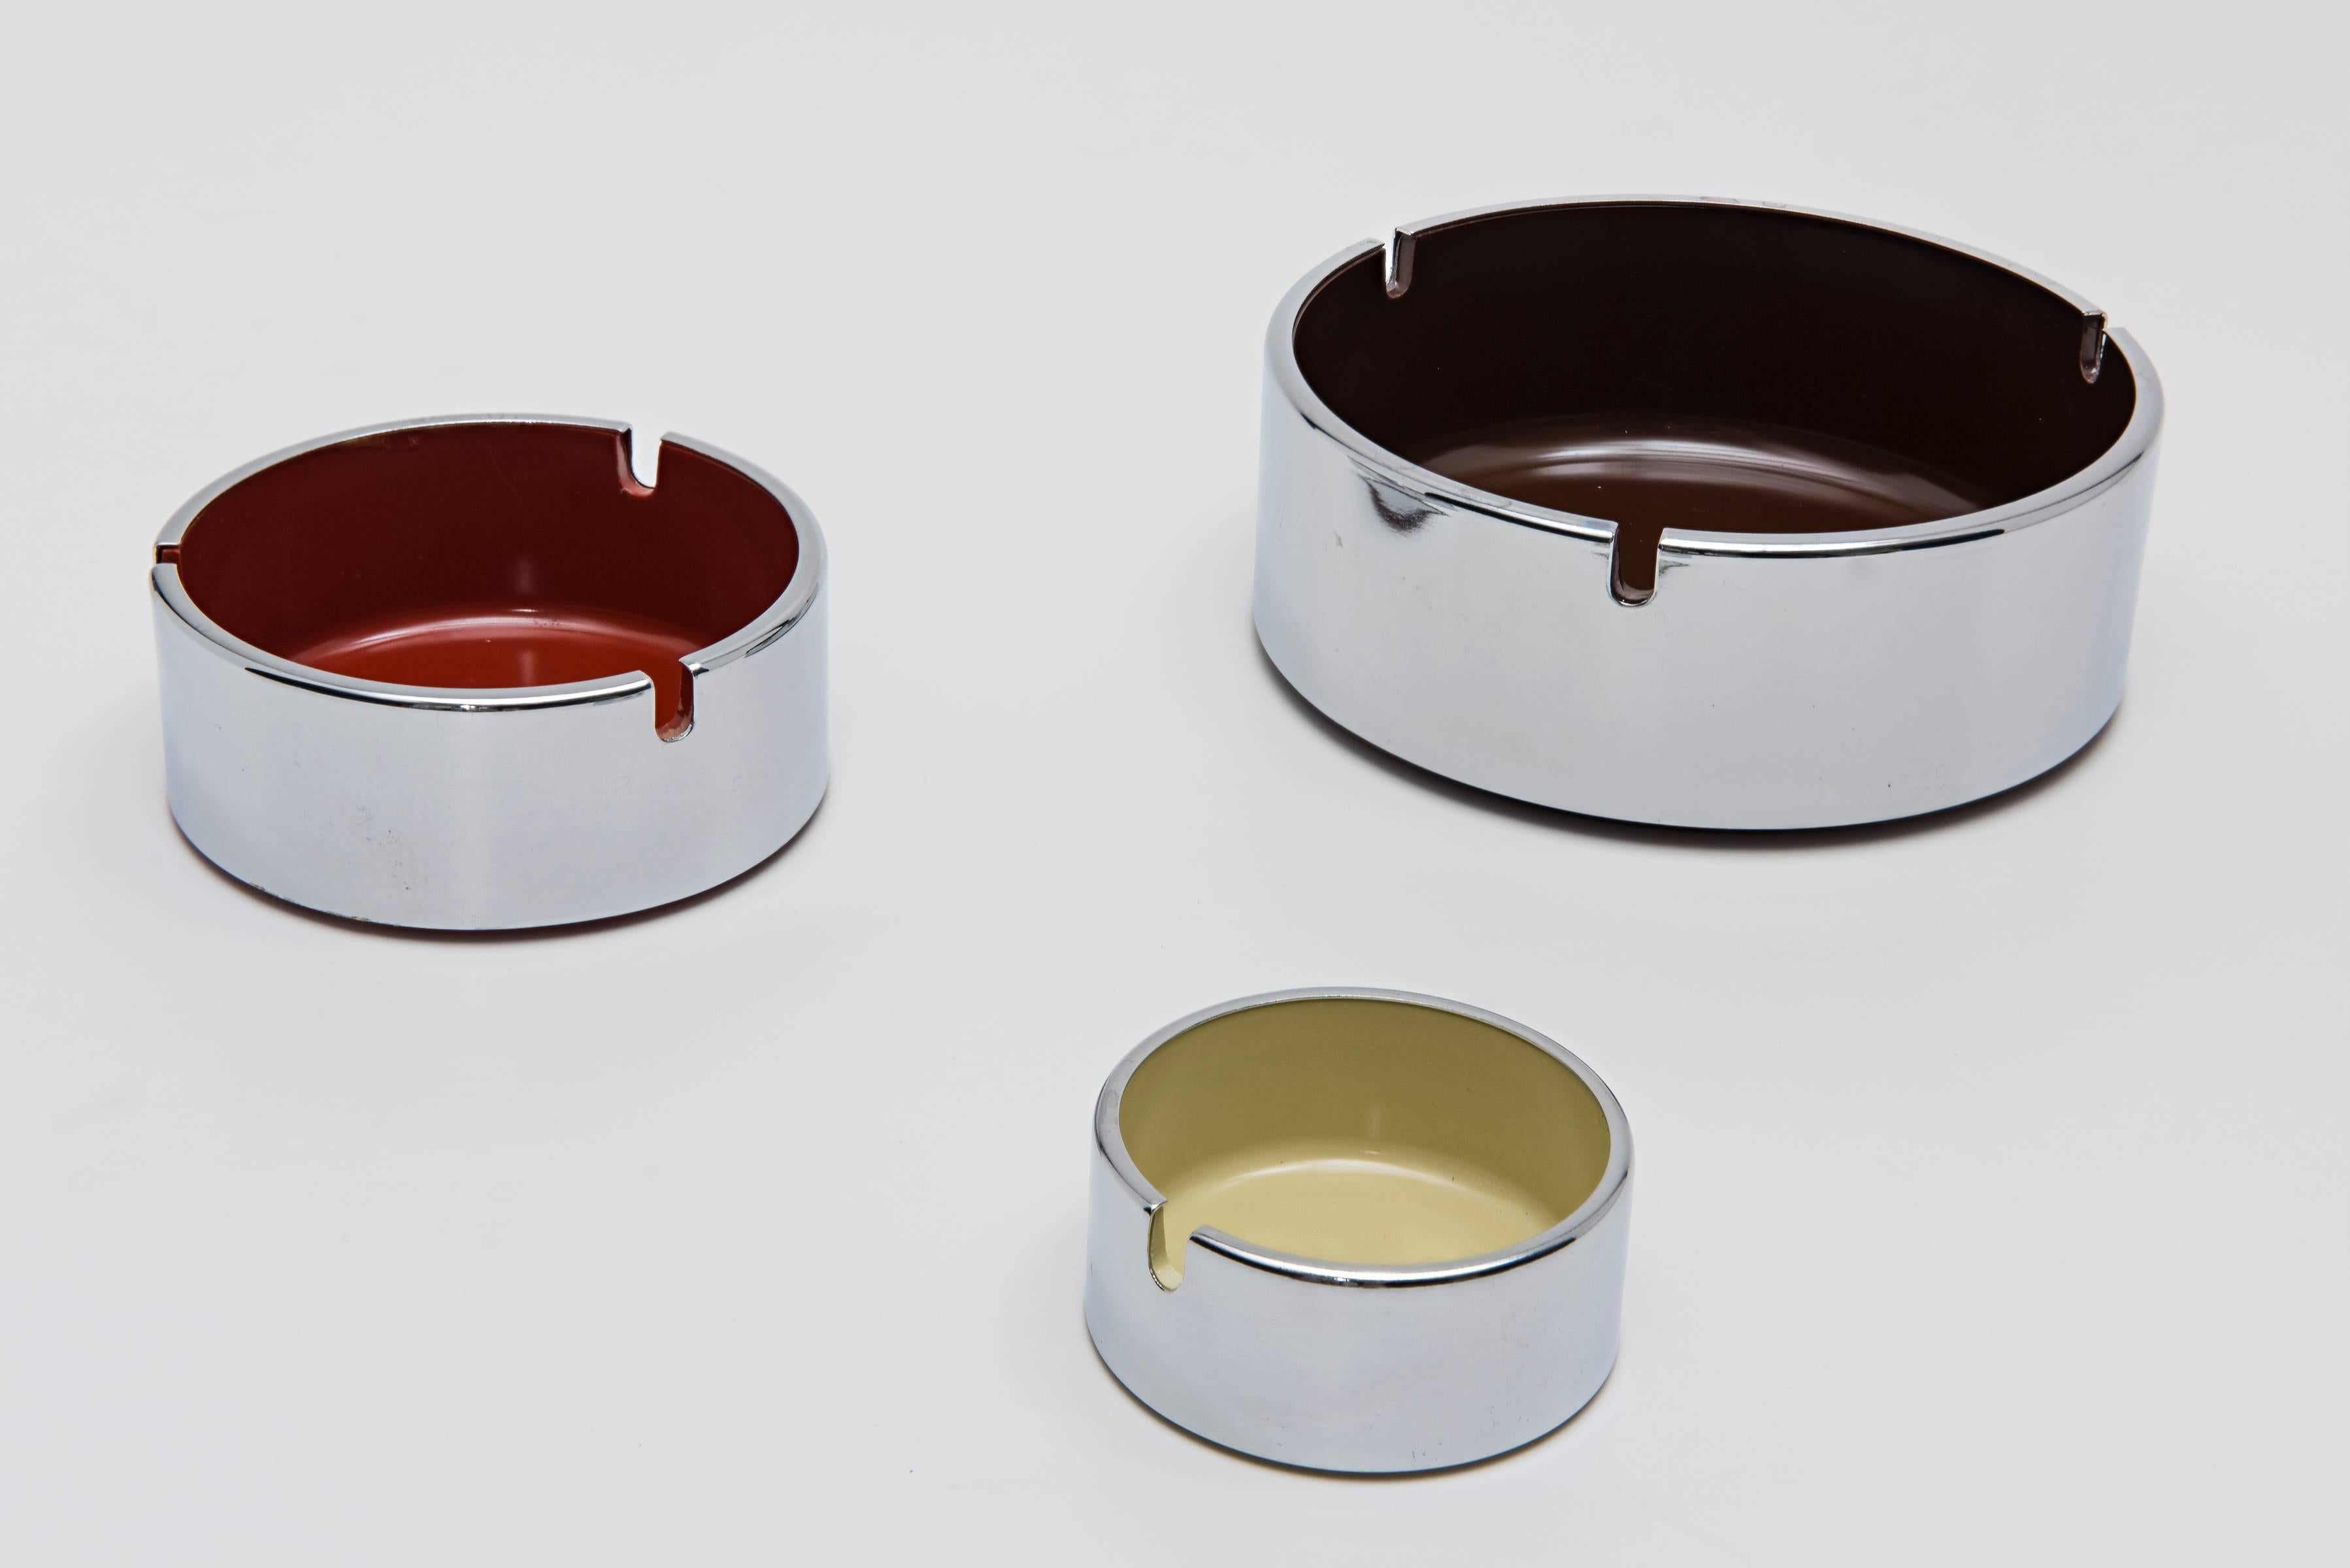 Beautiful set of polished stainless steel ashtrays, descending in size, with moulded plastic wells in brown, cream and burnt ochre. Underside of each moulded with 